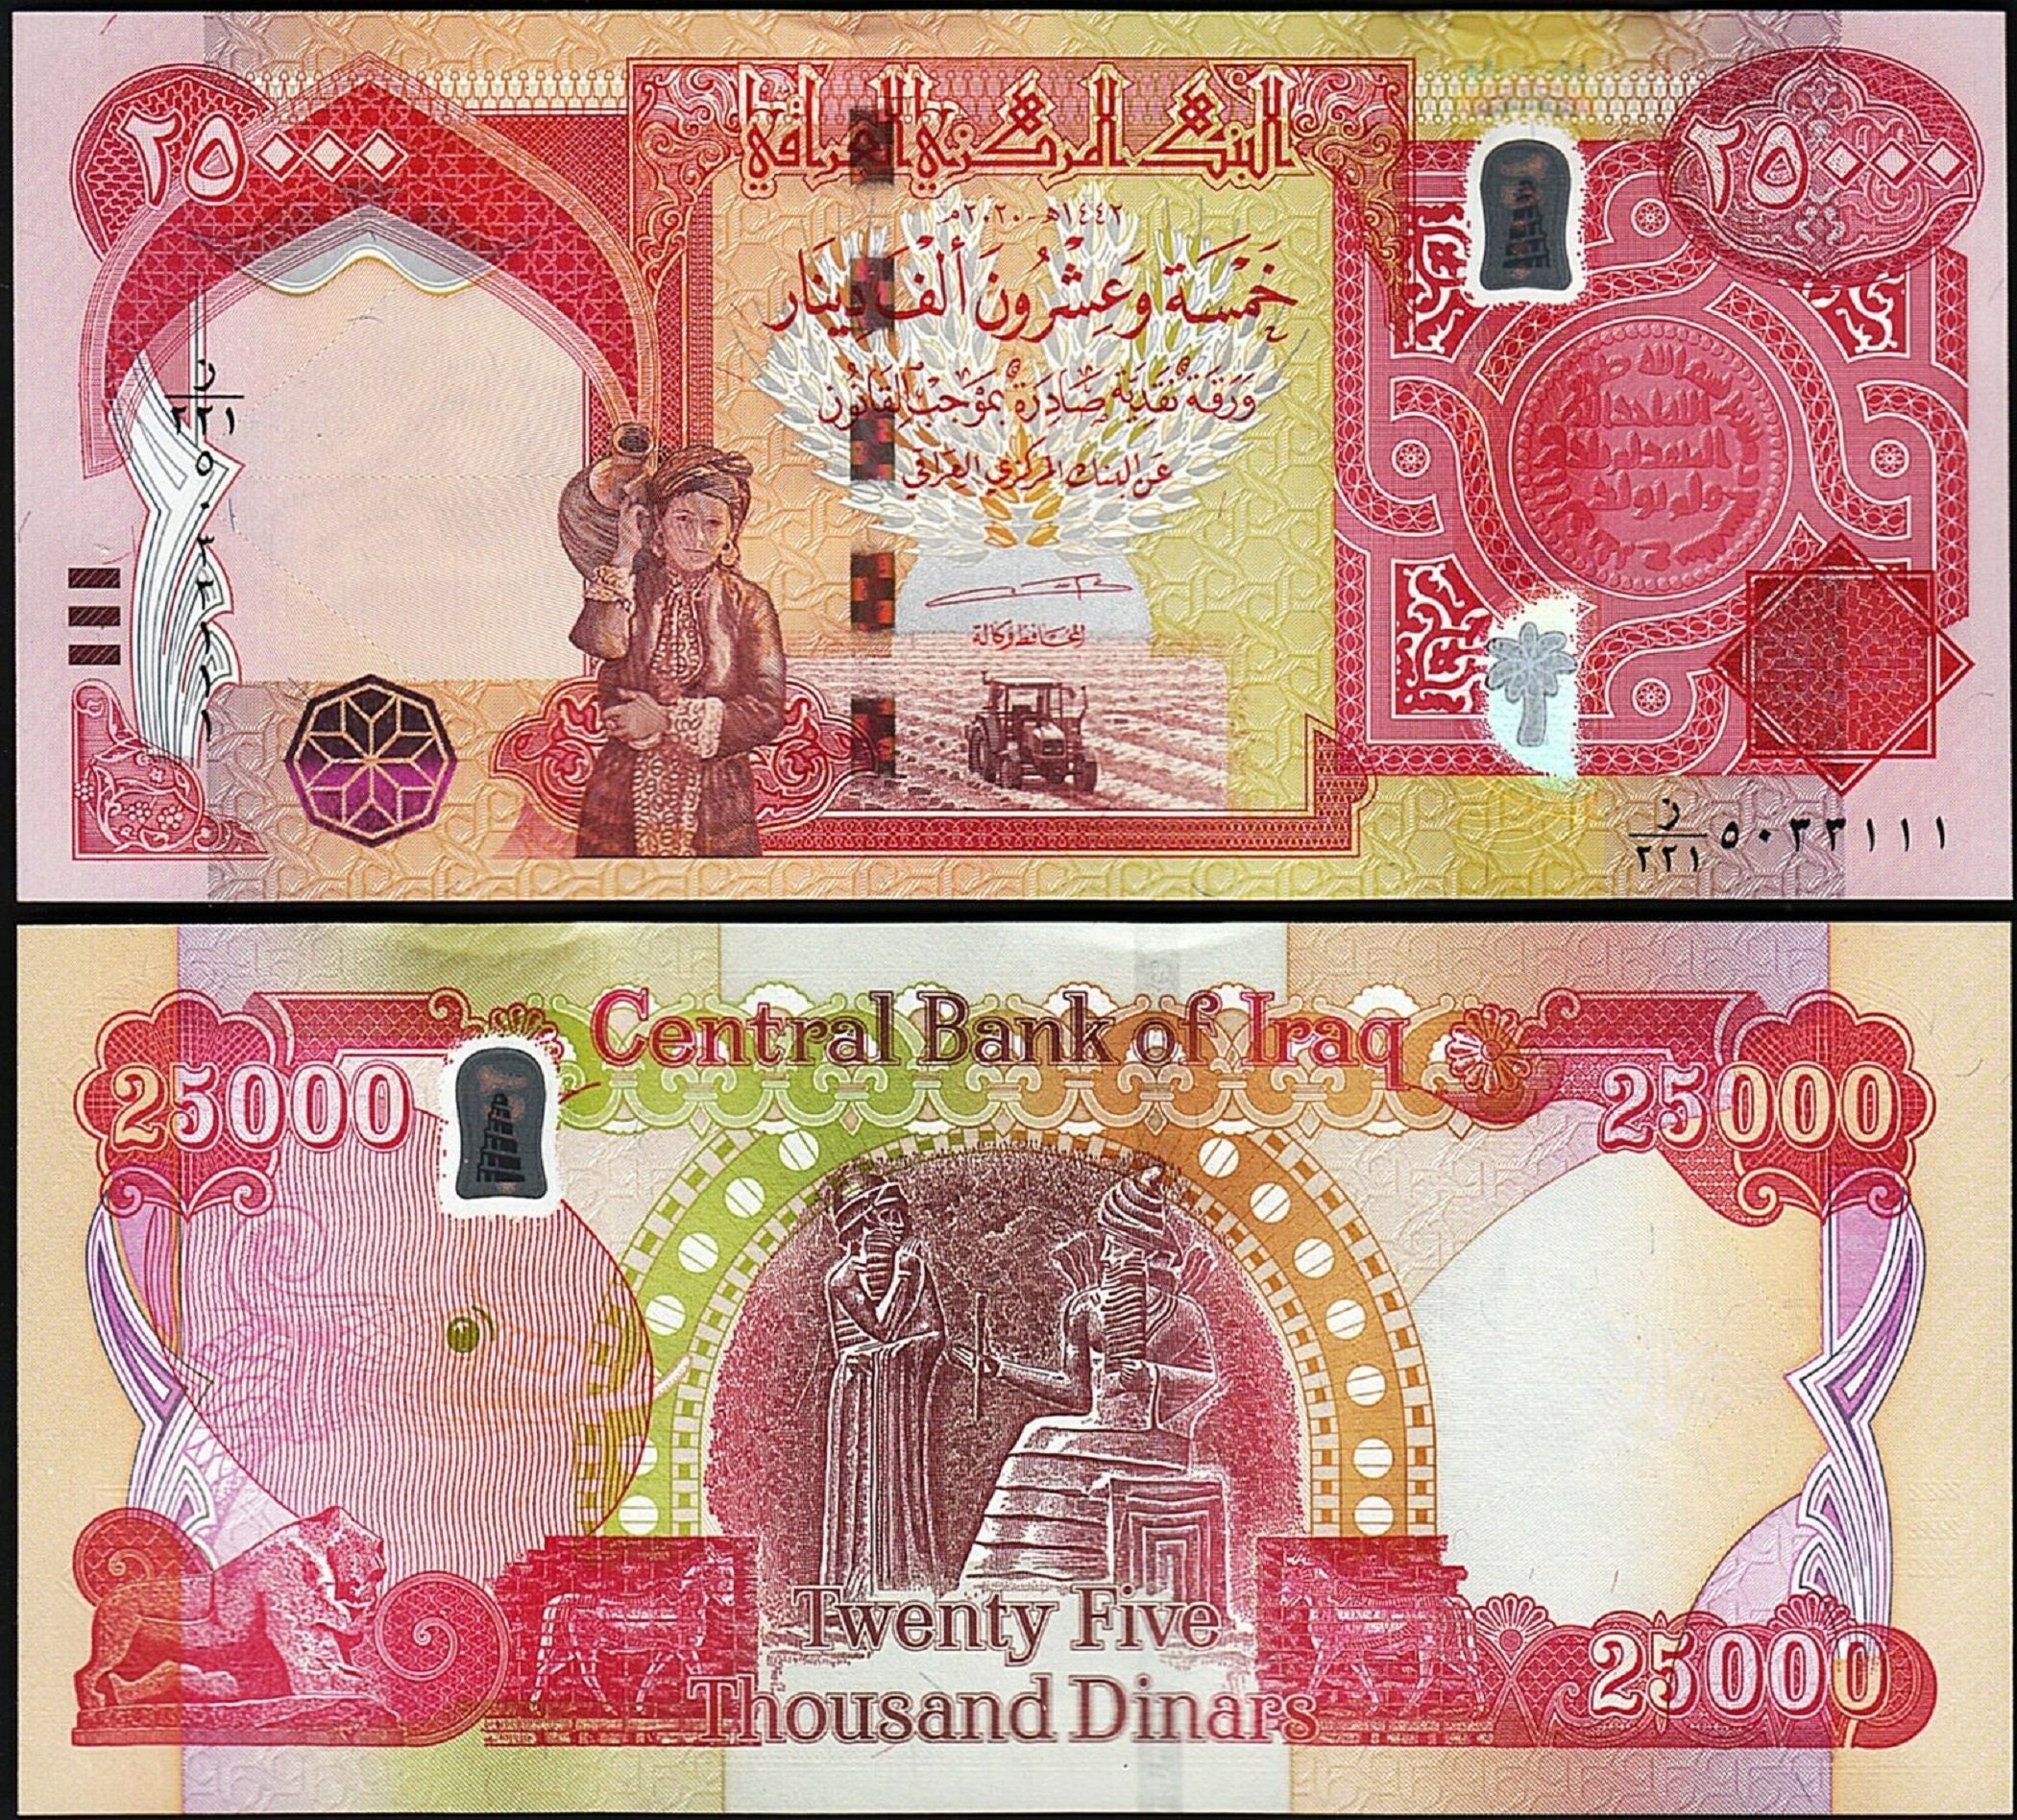 Iraqi Money 100,000 Dinar 4 x 25,000 Newly Issued with Extra Security Features UNCIRCULATED 100% Authentic & U.V Tested 